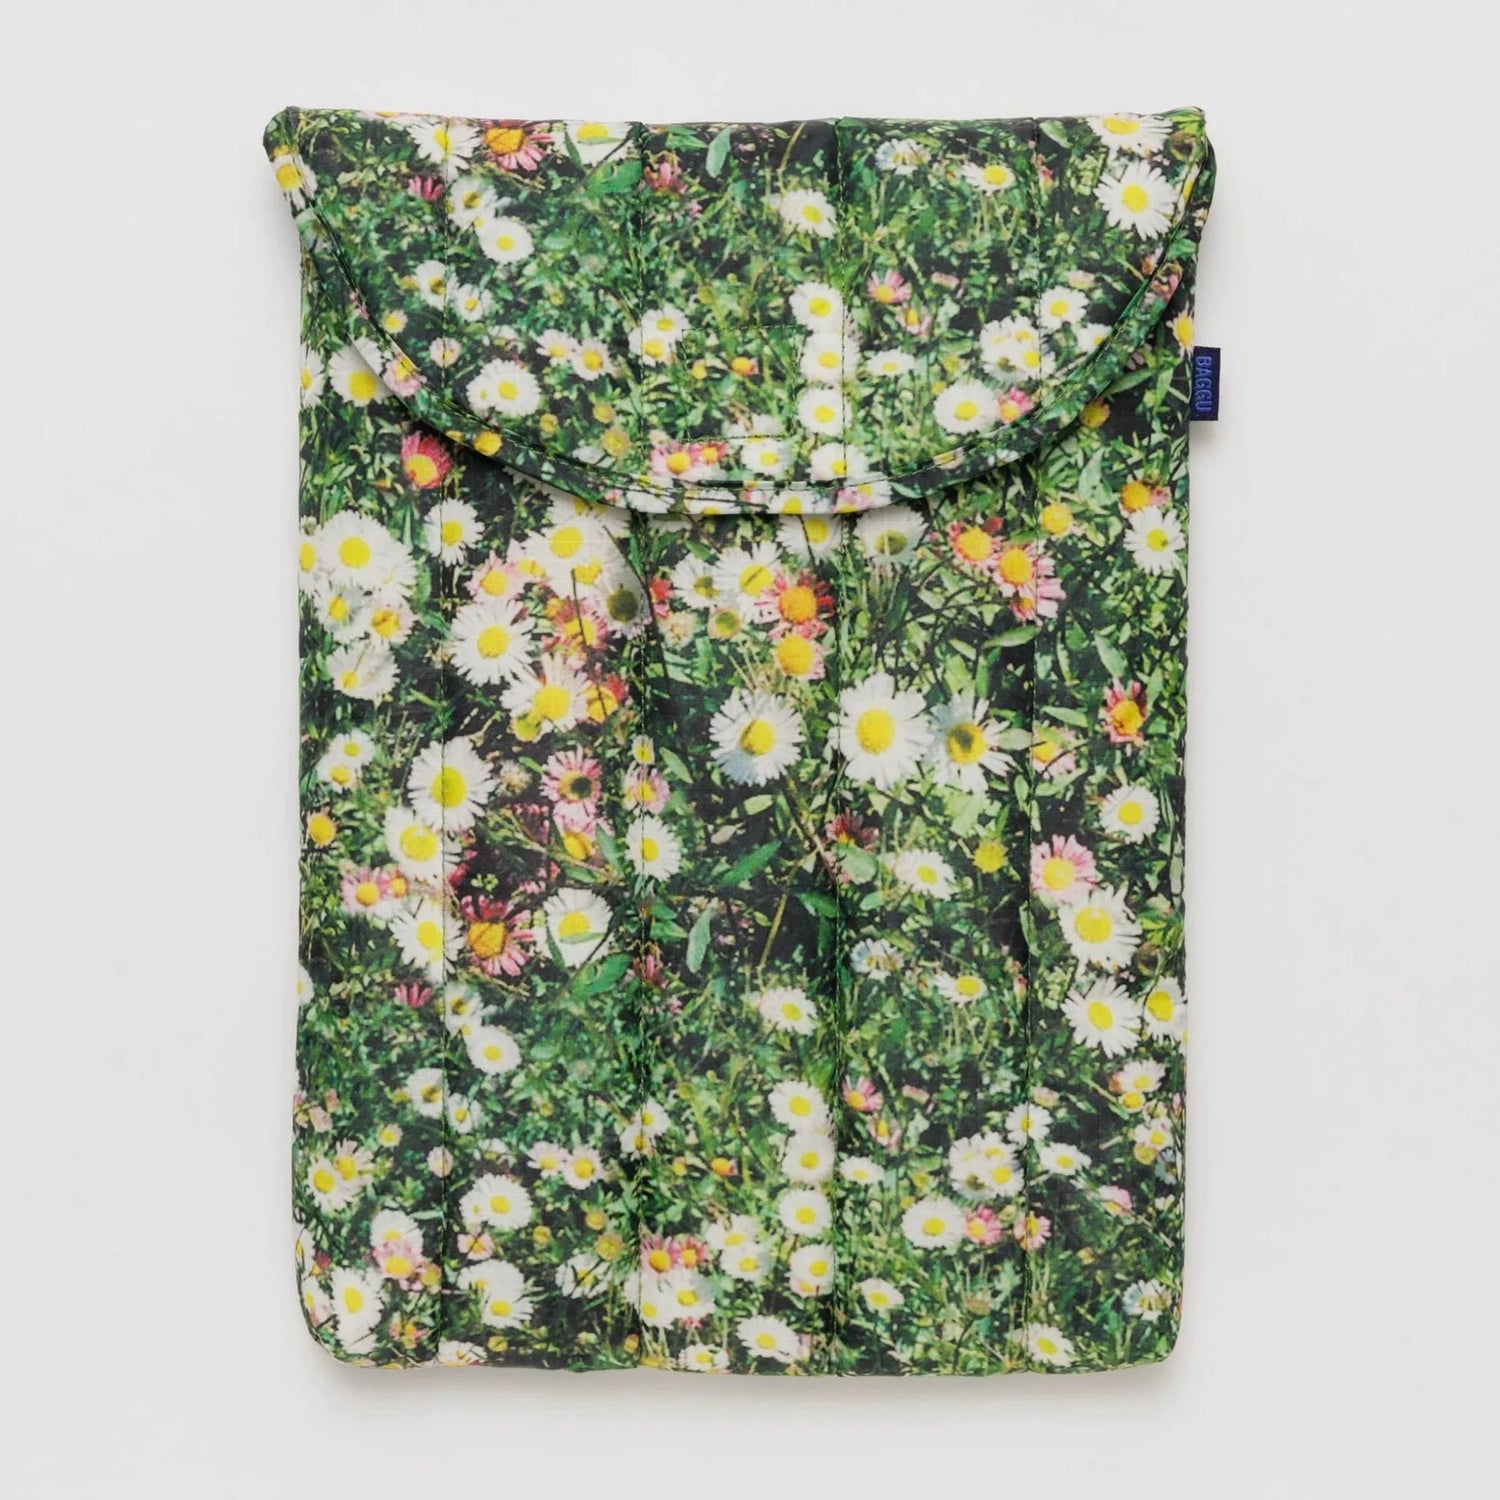 Puffy Quilted Laptop Sleeve with Green and White Wild Daisy Field Pattern